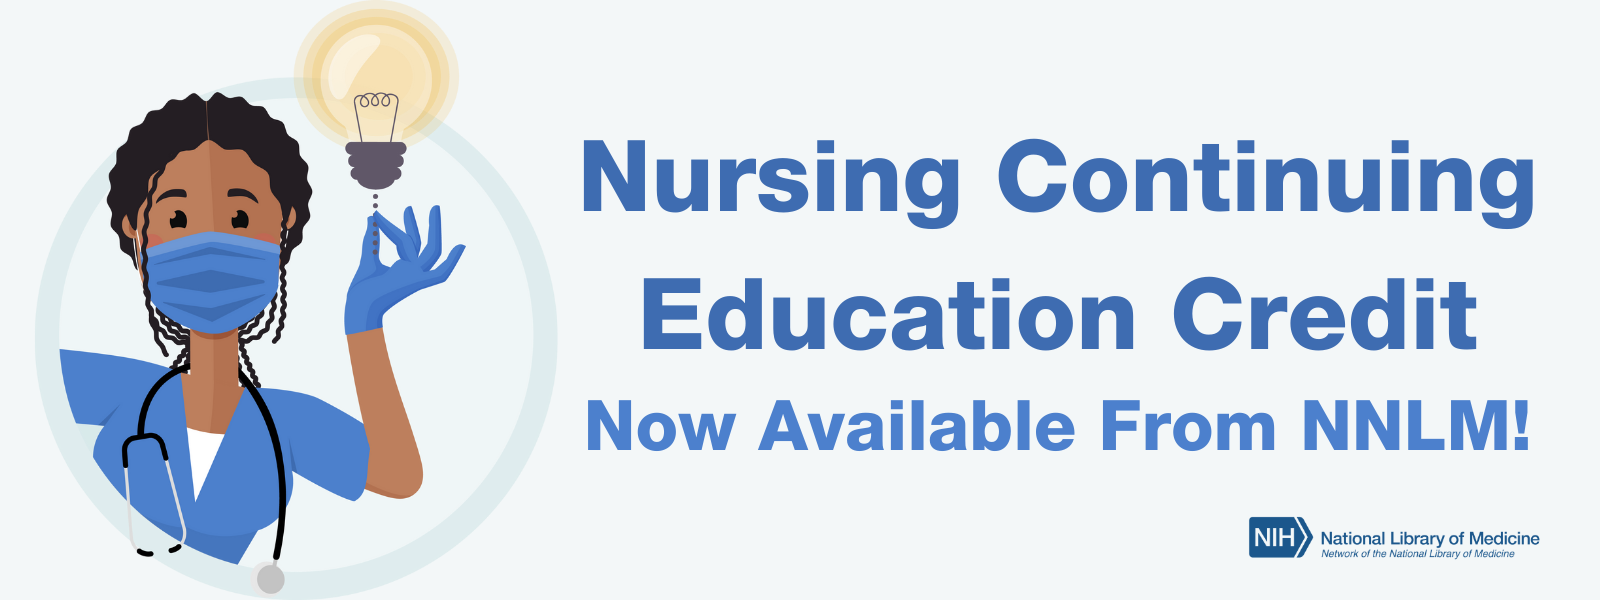 Nurse with idea lightbulb and text that reads Nursing Continuing Education Credit now available from NNLM